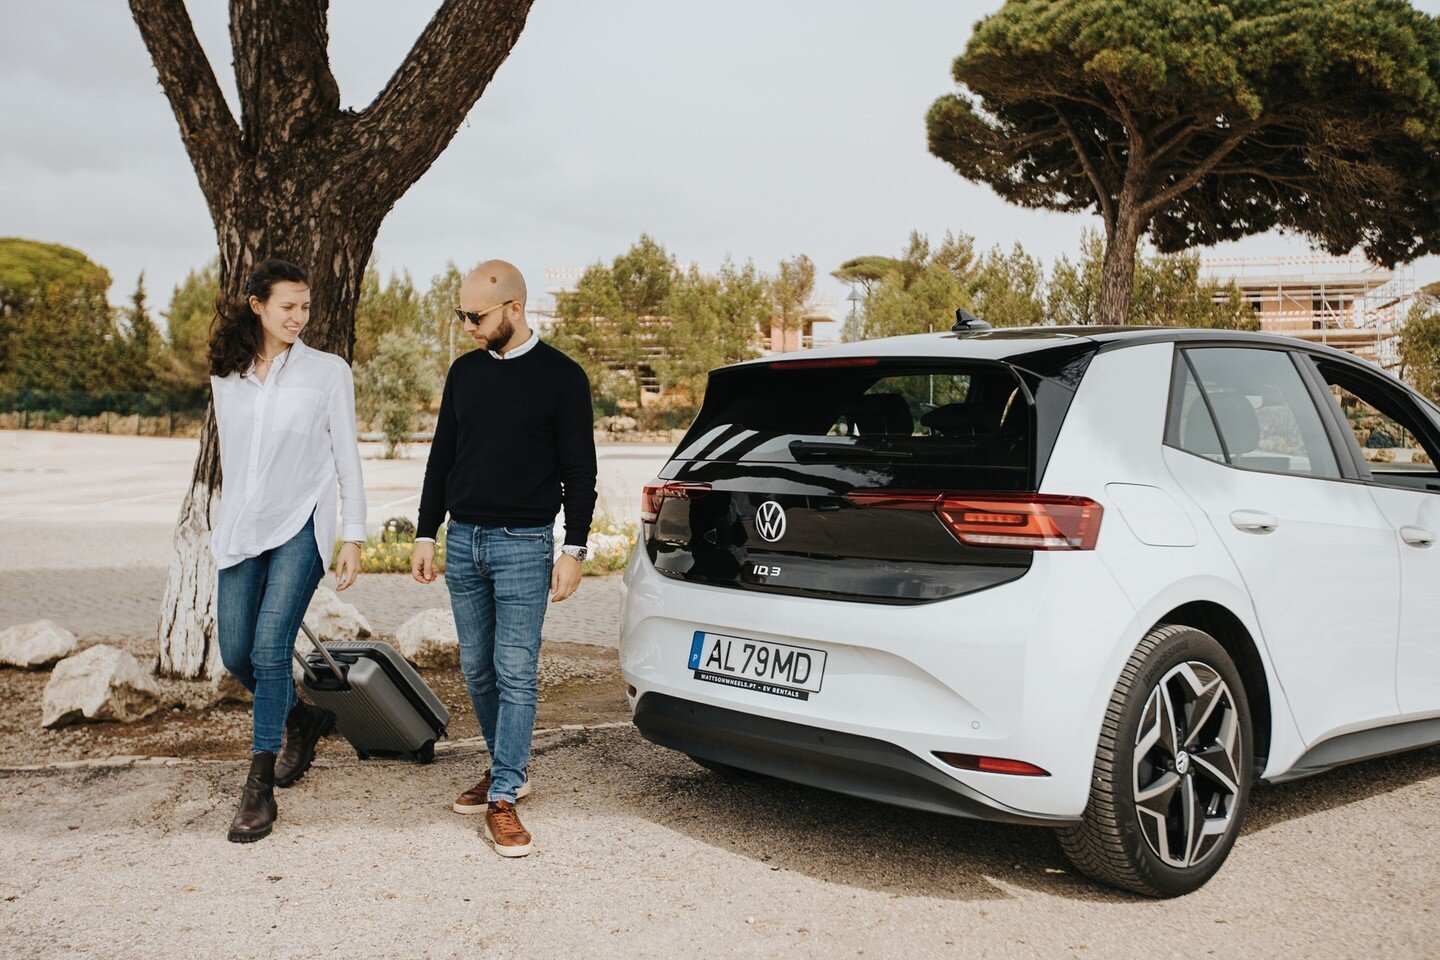 🇬🇧:⁠ There's still time to enjoy the good #sunny weather in Portugal aboard of our 100% electric cars!⁠
Be it a city trip or a nature escape, we have just the right vehicle for you - check out all cars available at wattsonwheels.pt ⚡️⁠
Use the code